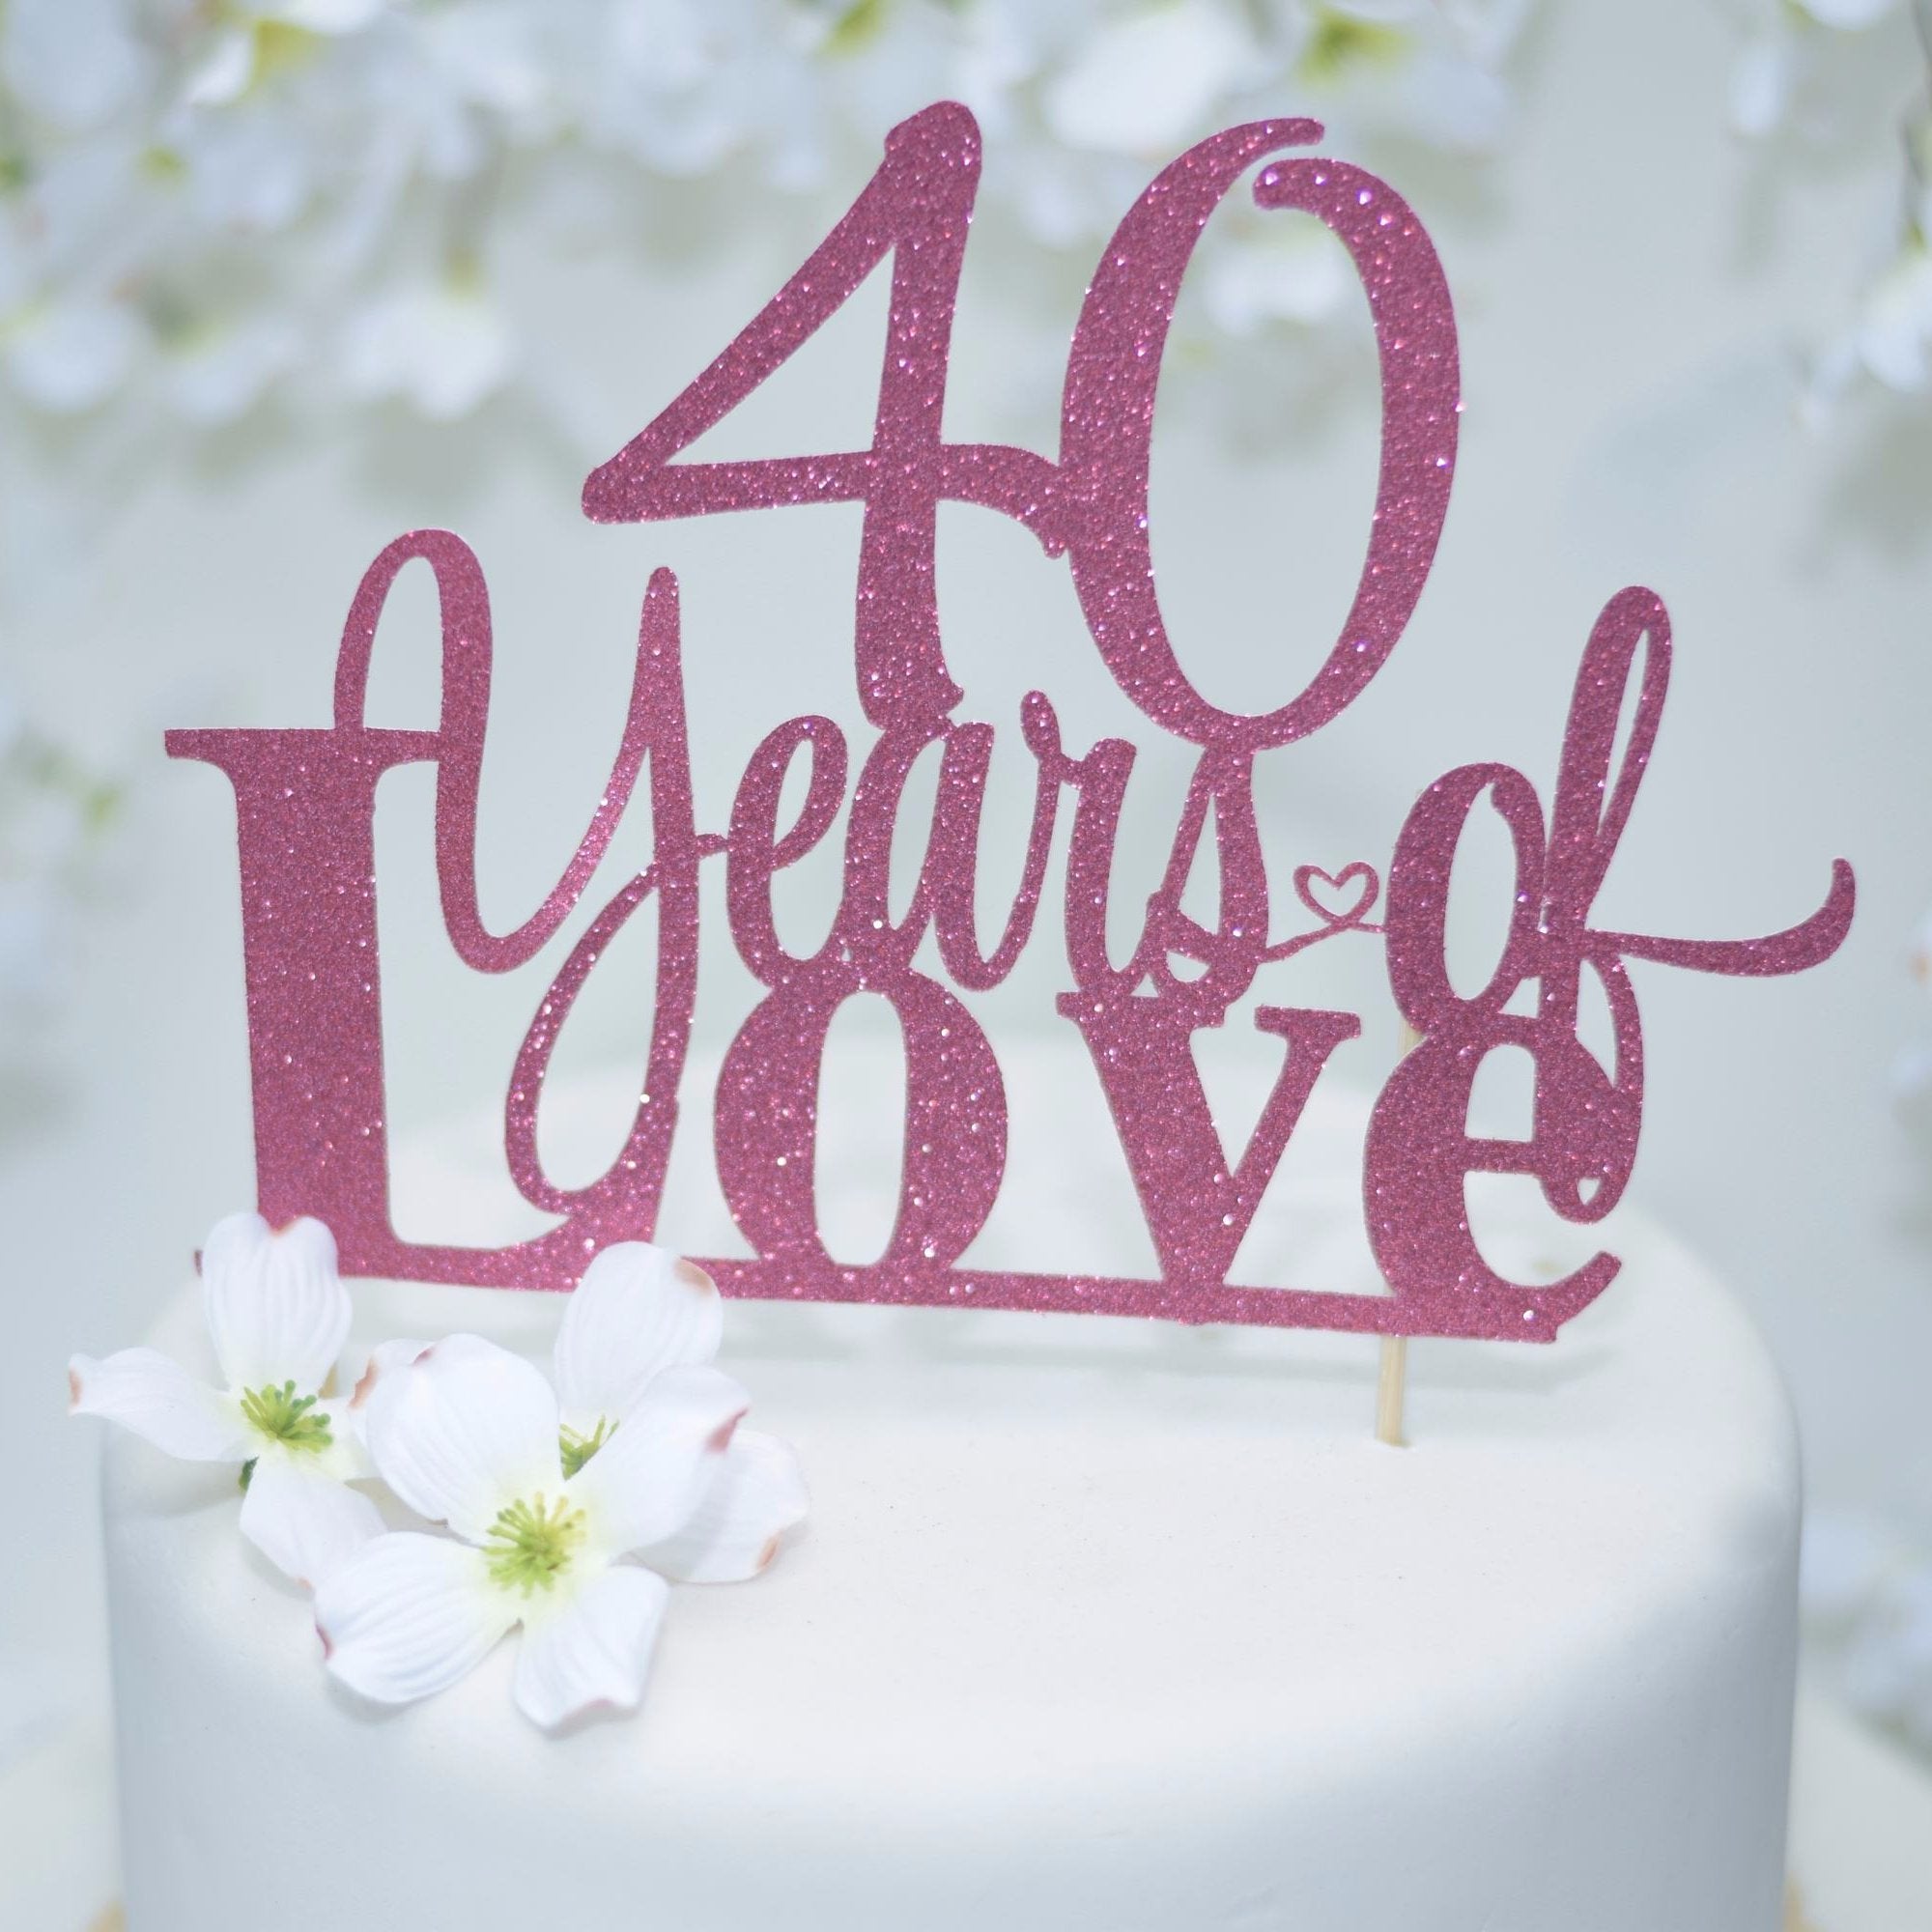 40th Birthday Cake Topper SVG PNG DXF Cheers to 40 Years - Etsy UK | 40th  birthday cake topper, Cake toppers, Birthday cake toppers